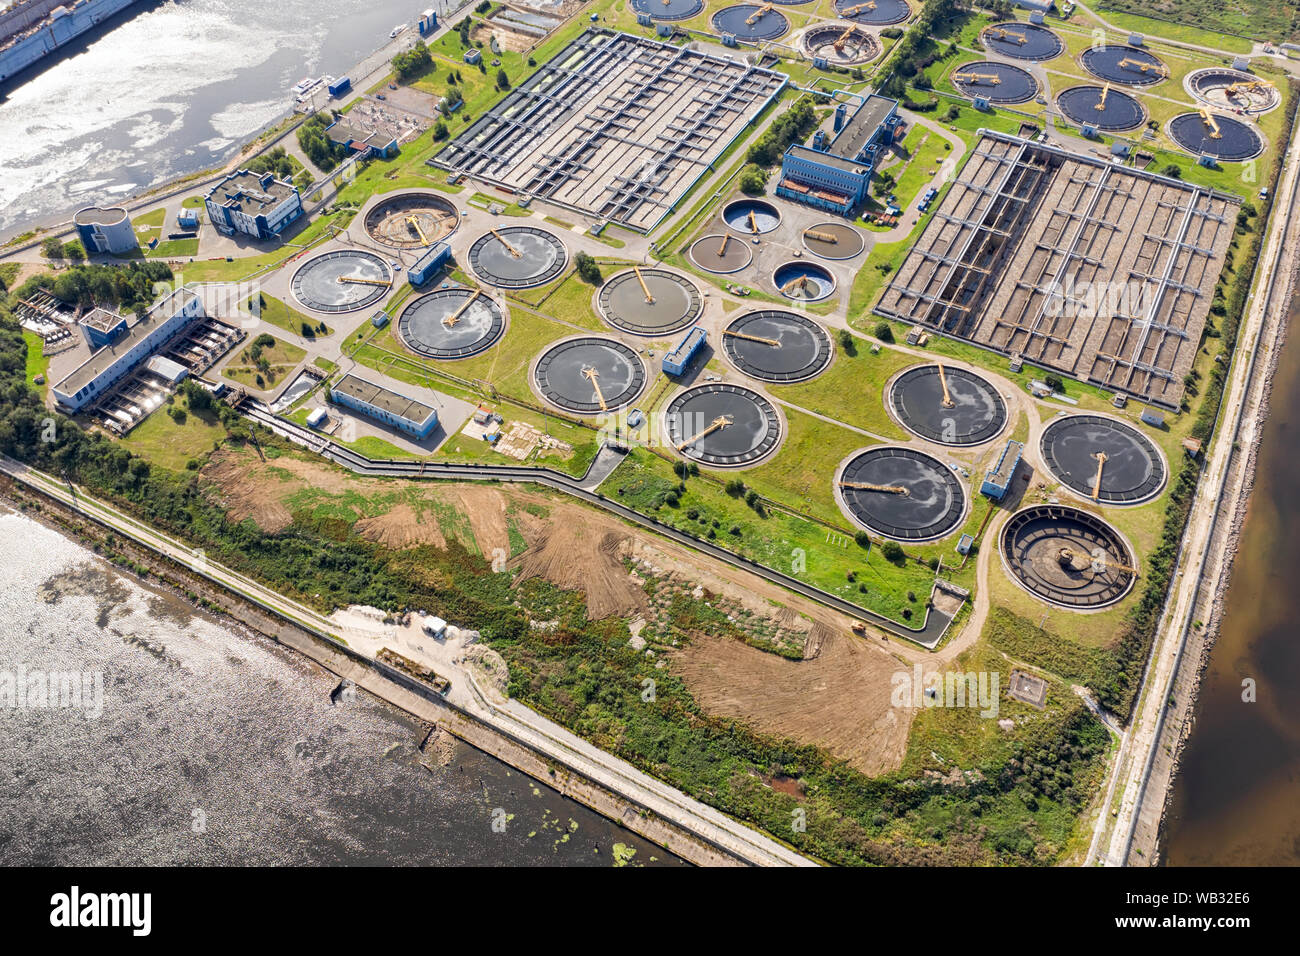 City sewage treatment plant. Cleaning facility on artificial island aerial view Stock Photo